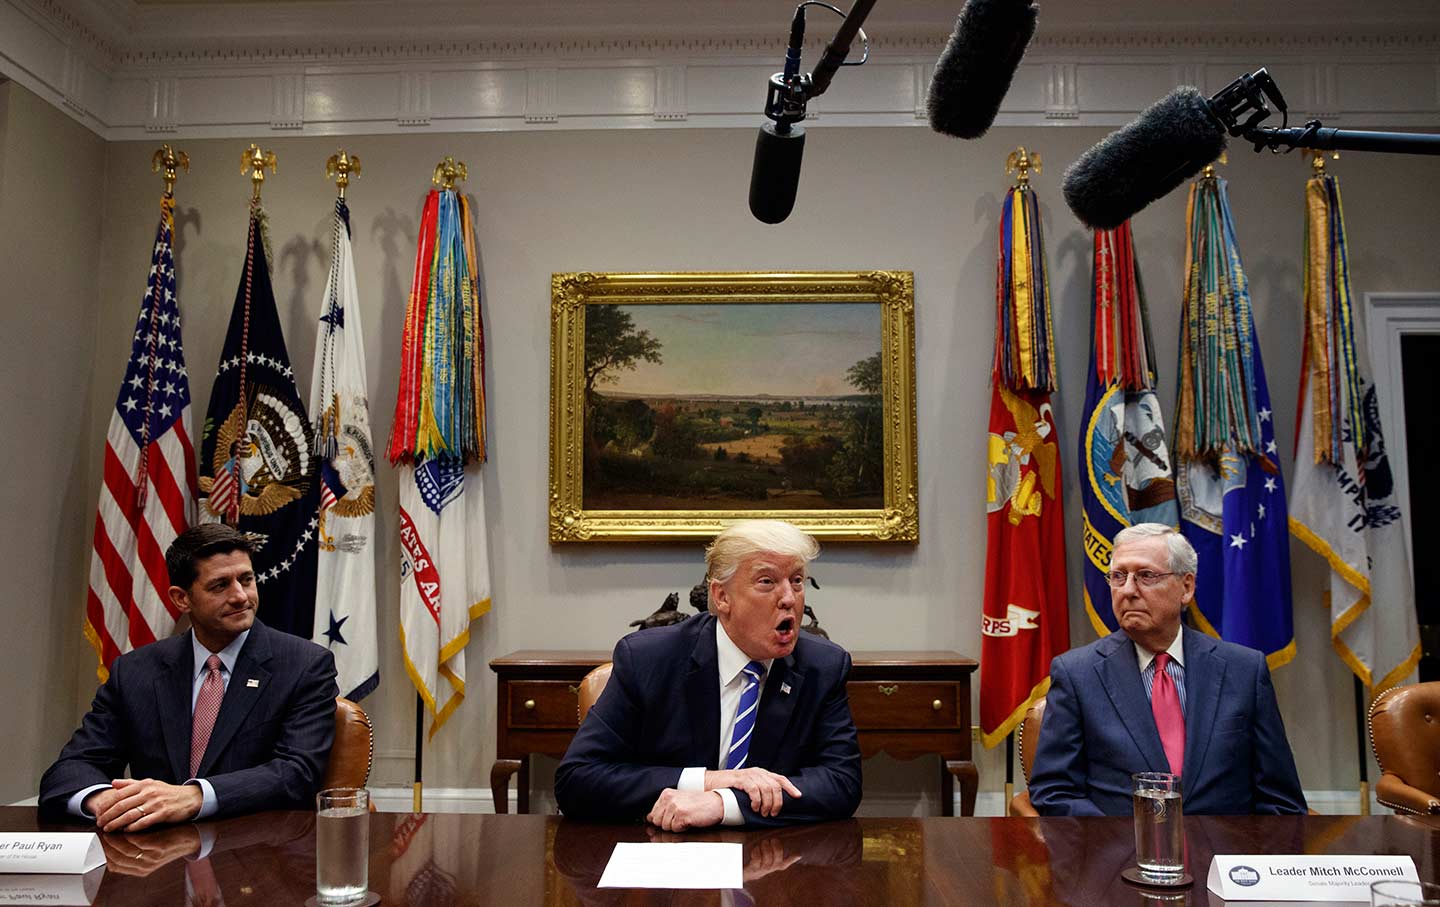 House Speaker Paul Ryan, left, and Senate Majority Leader Mitch McConnell, right, listen as Donald Trump speaks during a meeting on tax reform in the White House on September 5, 2017.